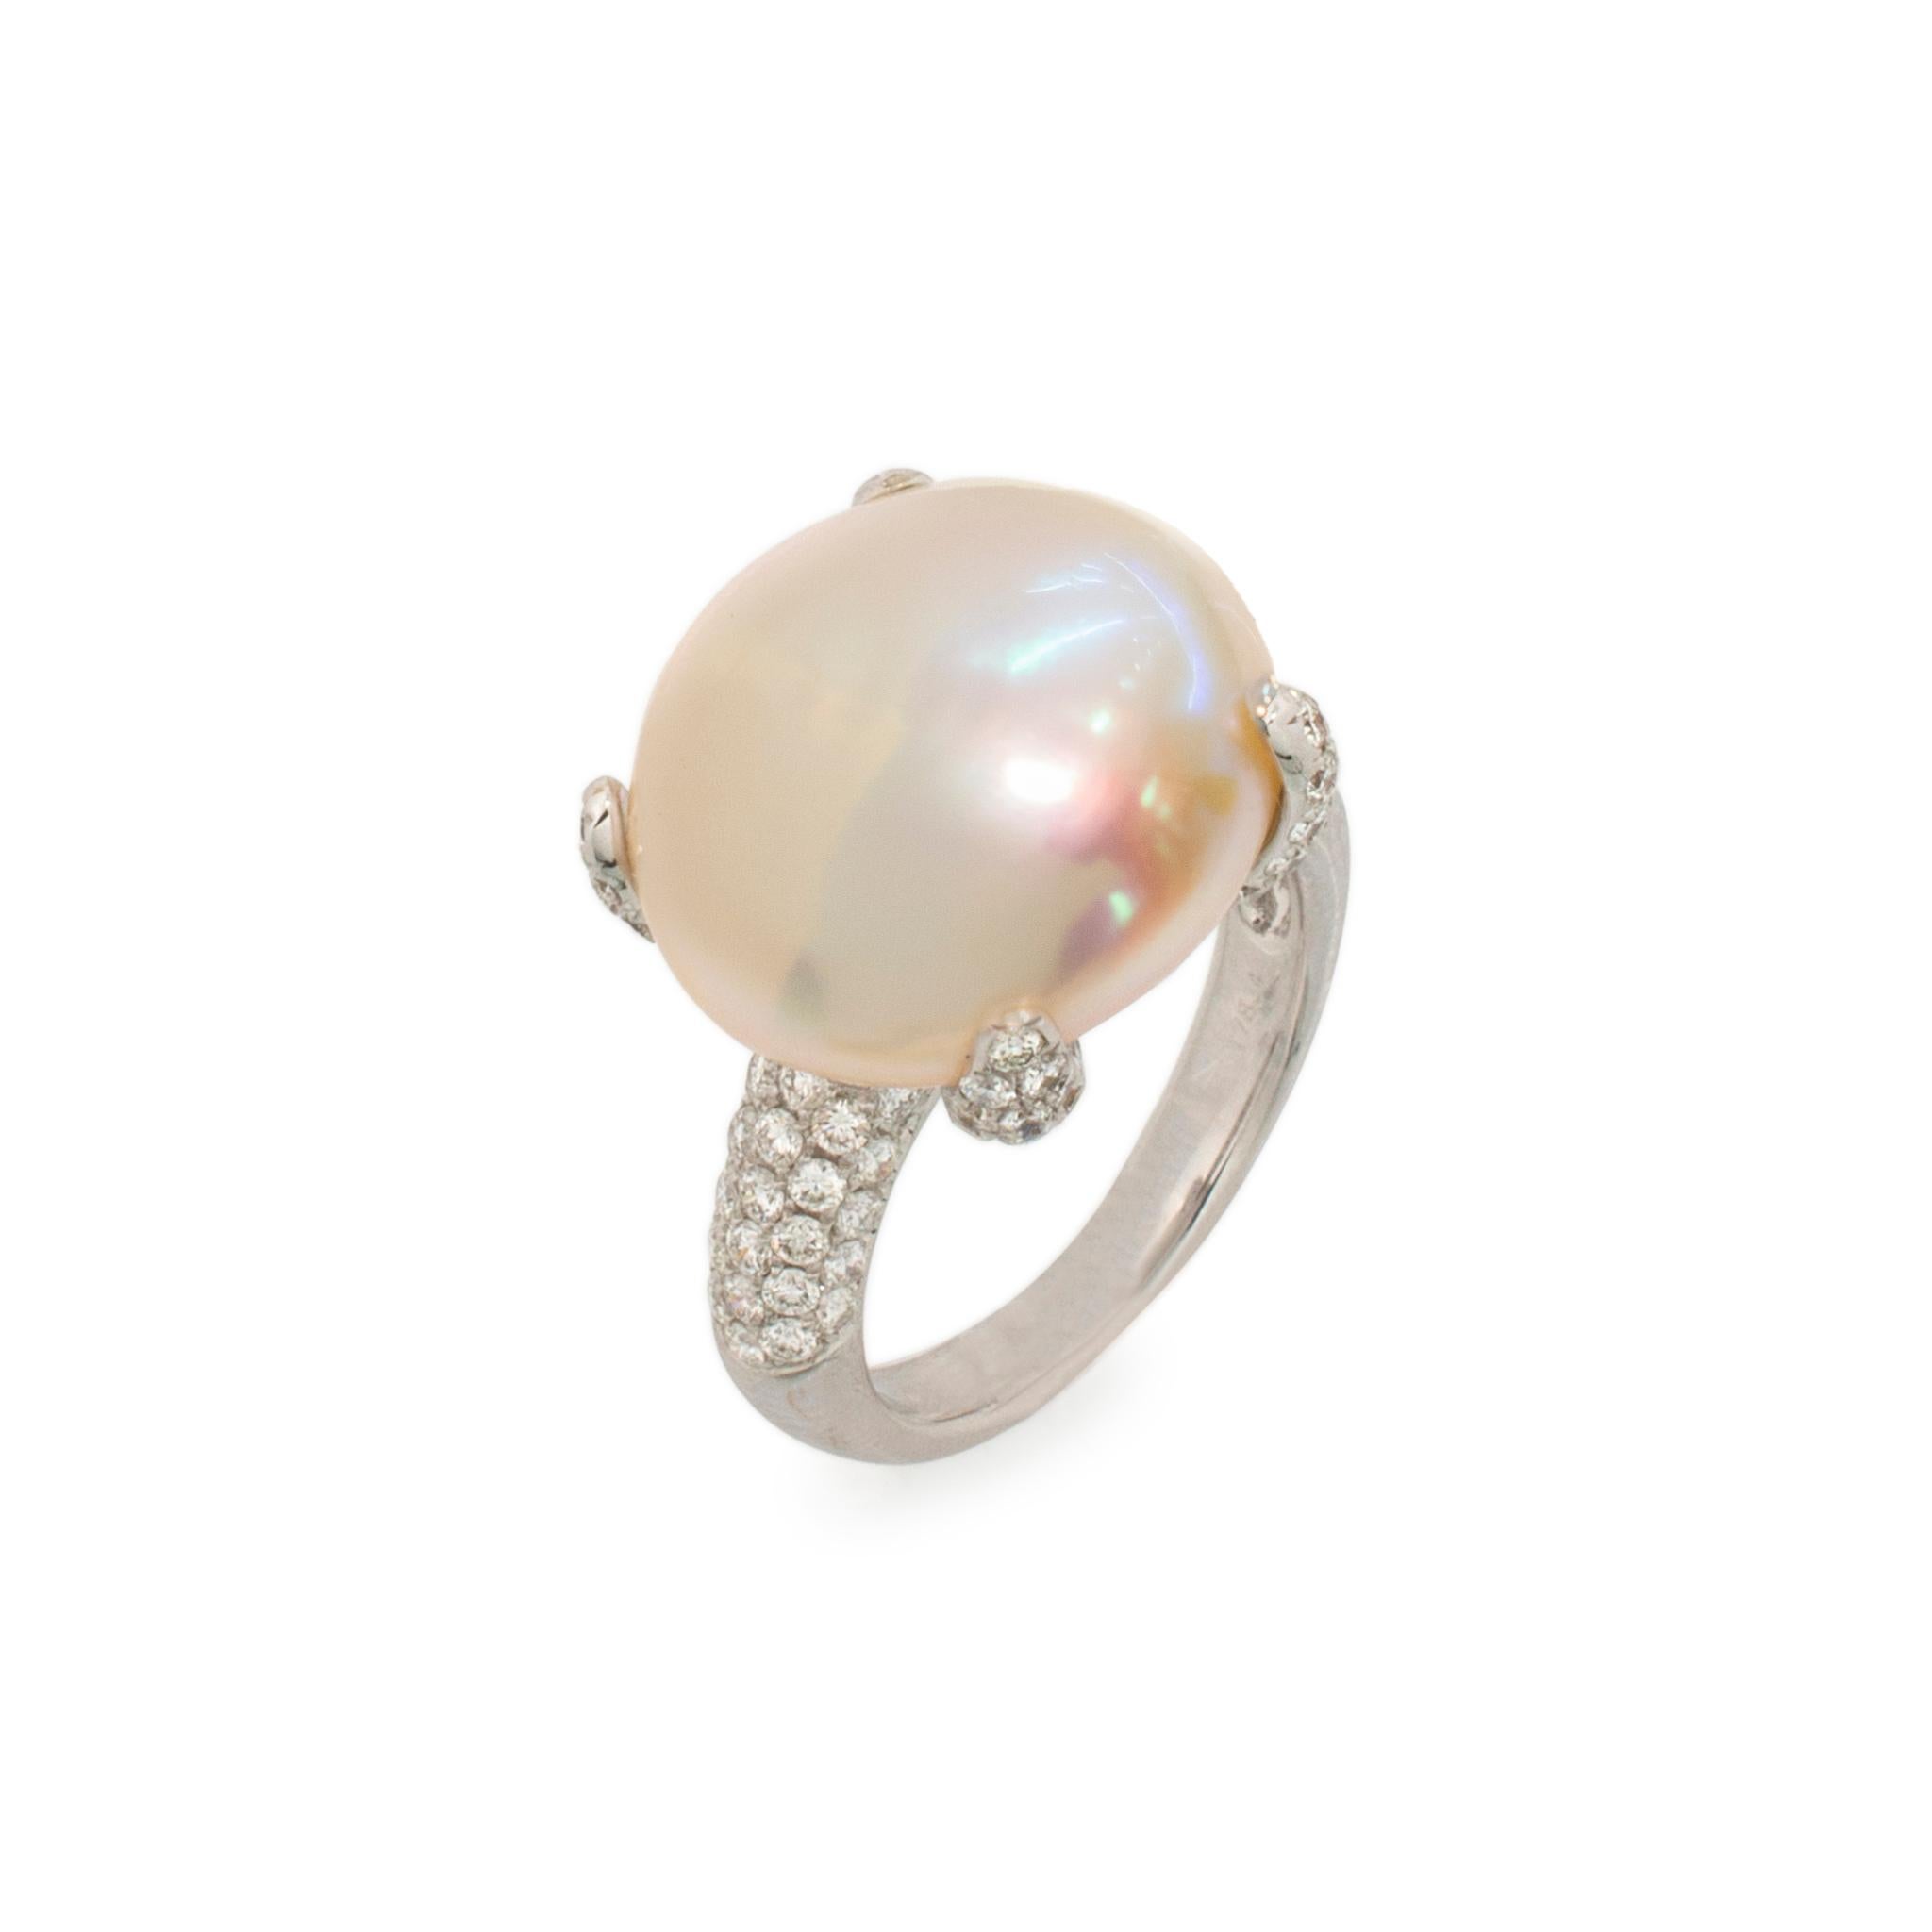 Gender: Ladies

Metal Type: 18K White Gold

Ring size: 6.5

Total weight: 9.88 grams

Natural pearl 18K white gold diamond cocktail ring with a half round shank.

Engraved with 